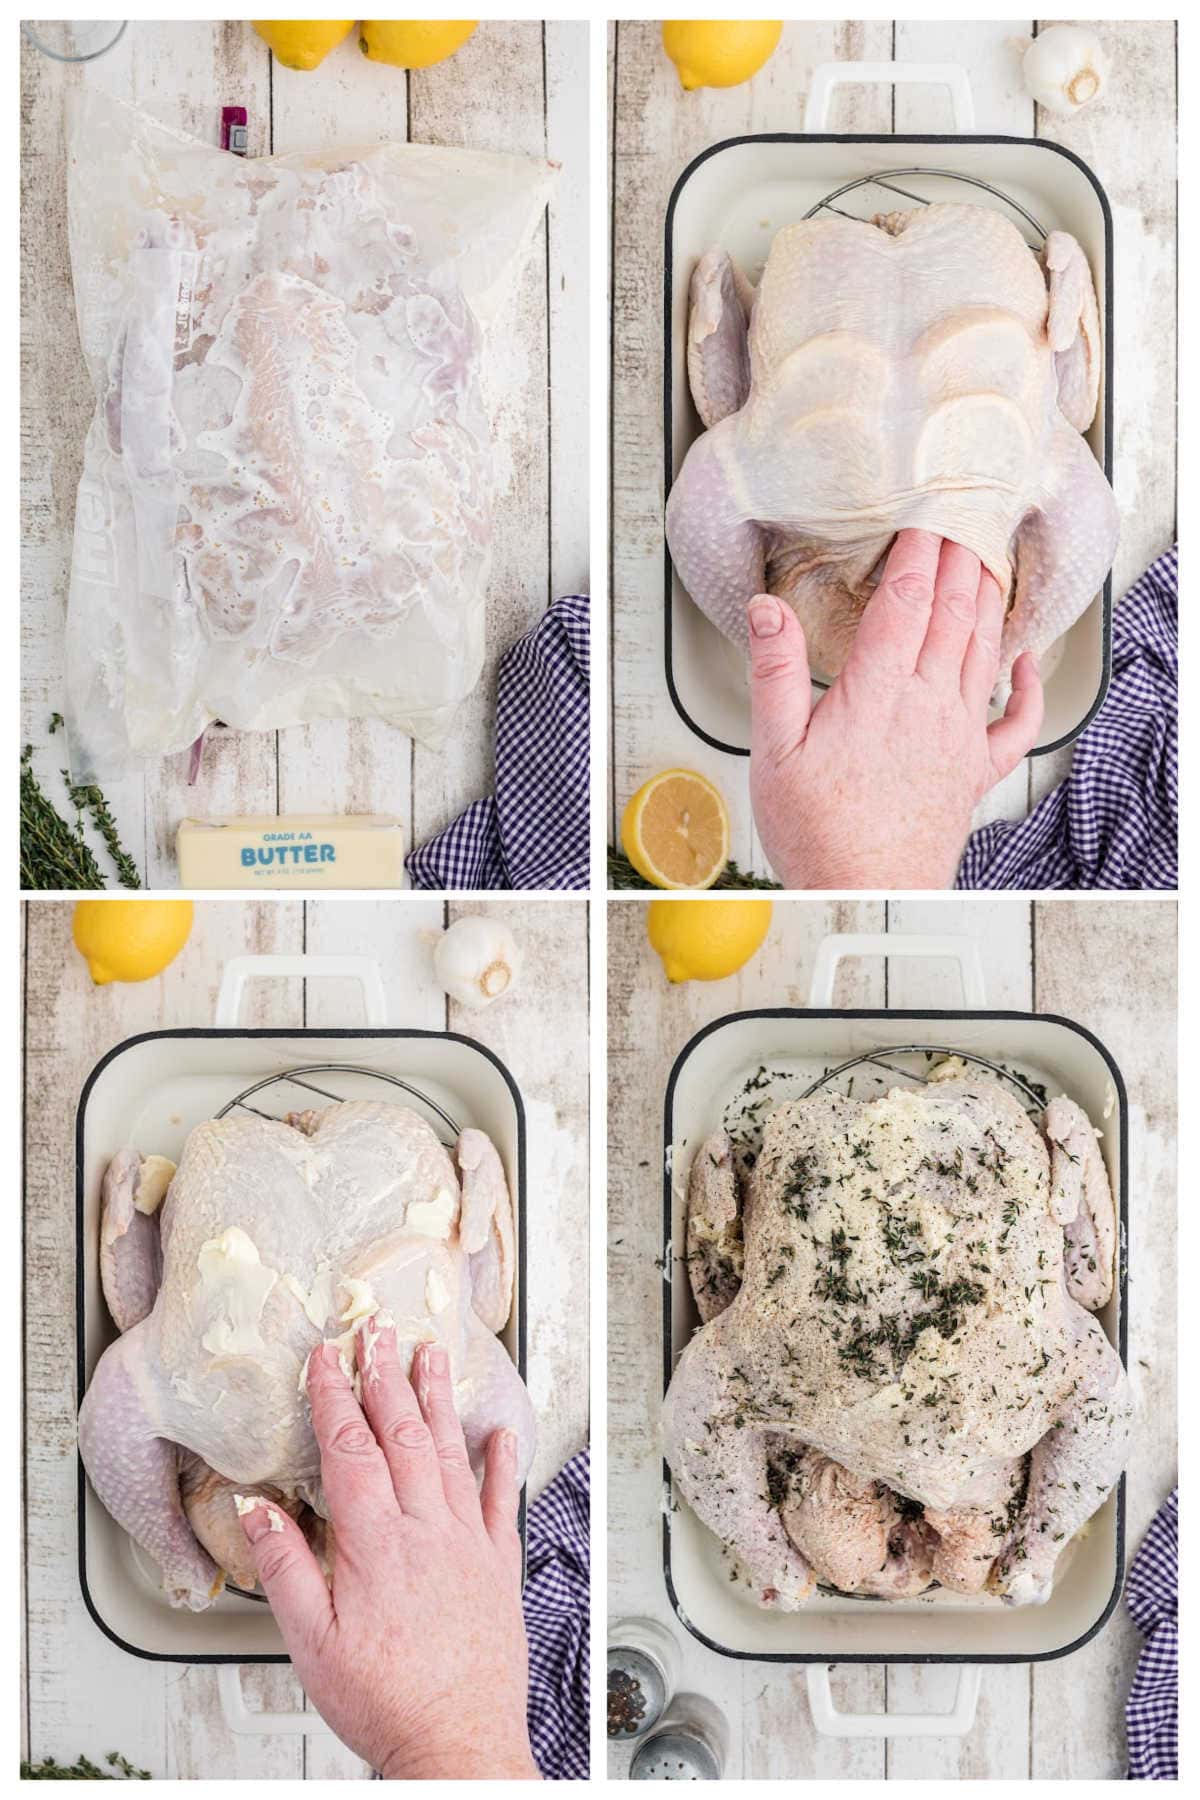 Step by step images are showing how to make buttermilk brined roast chicken.